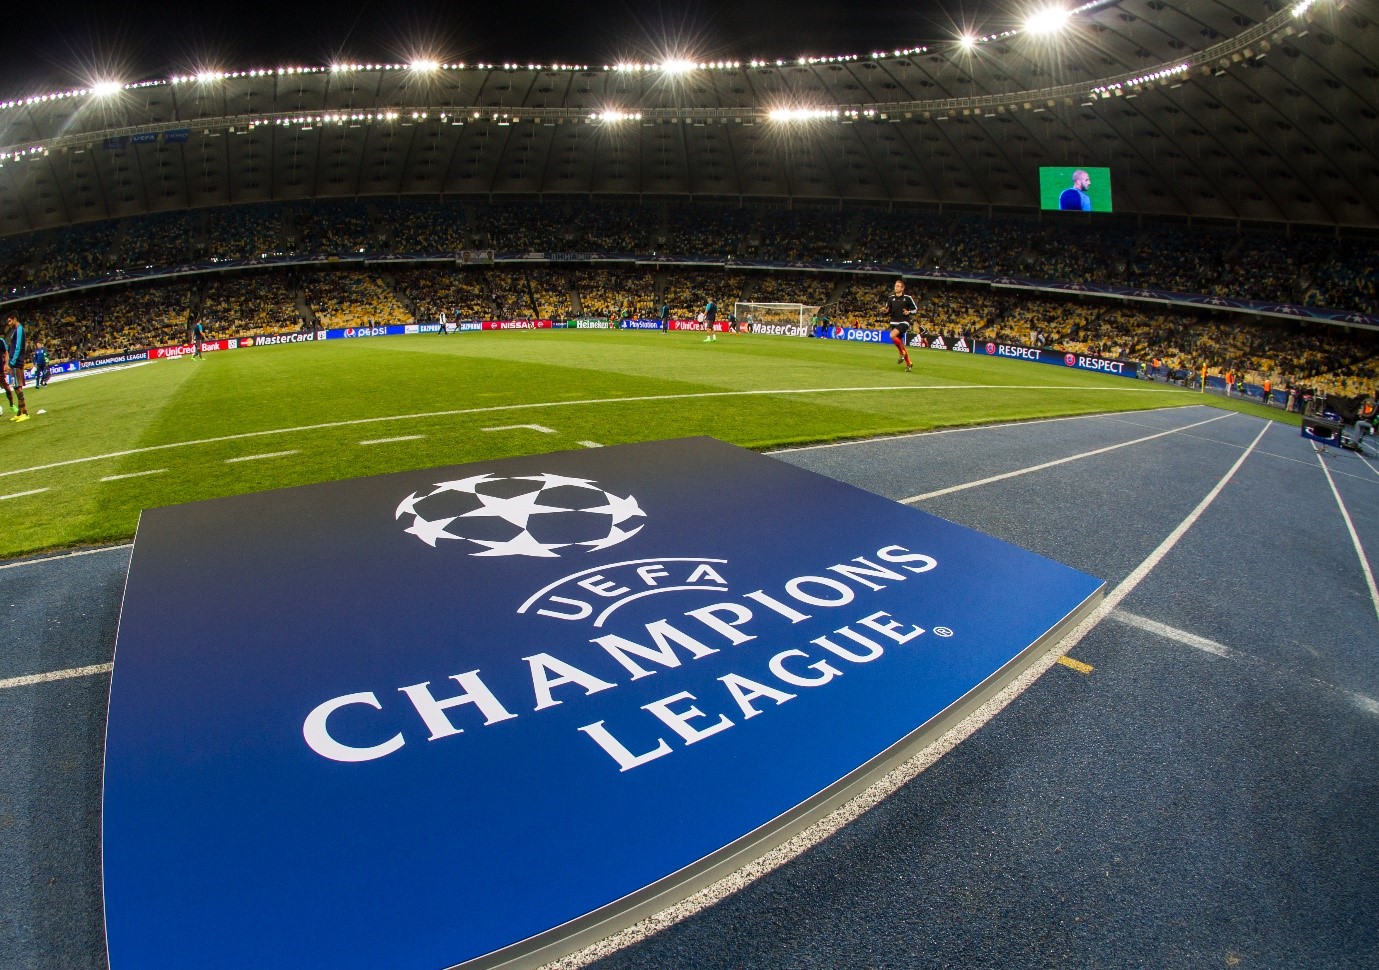 Champions League last-16 draw: PSG to play Bayern, Liverpool to face Real Madrid